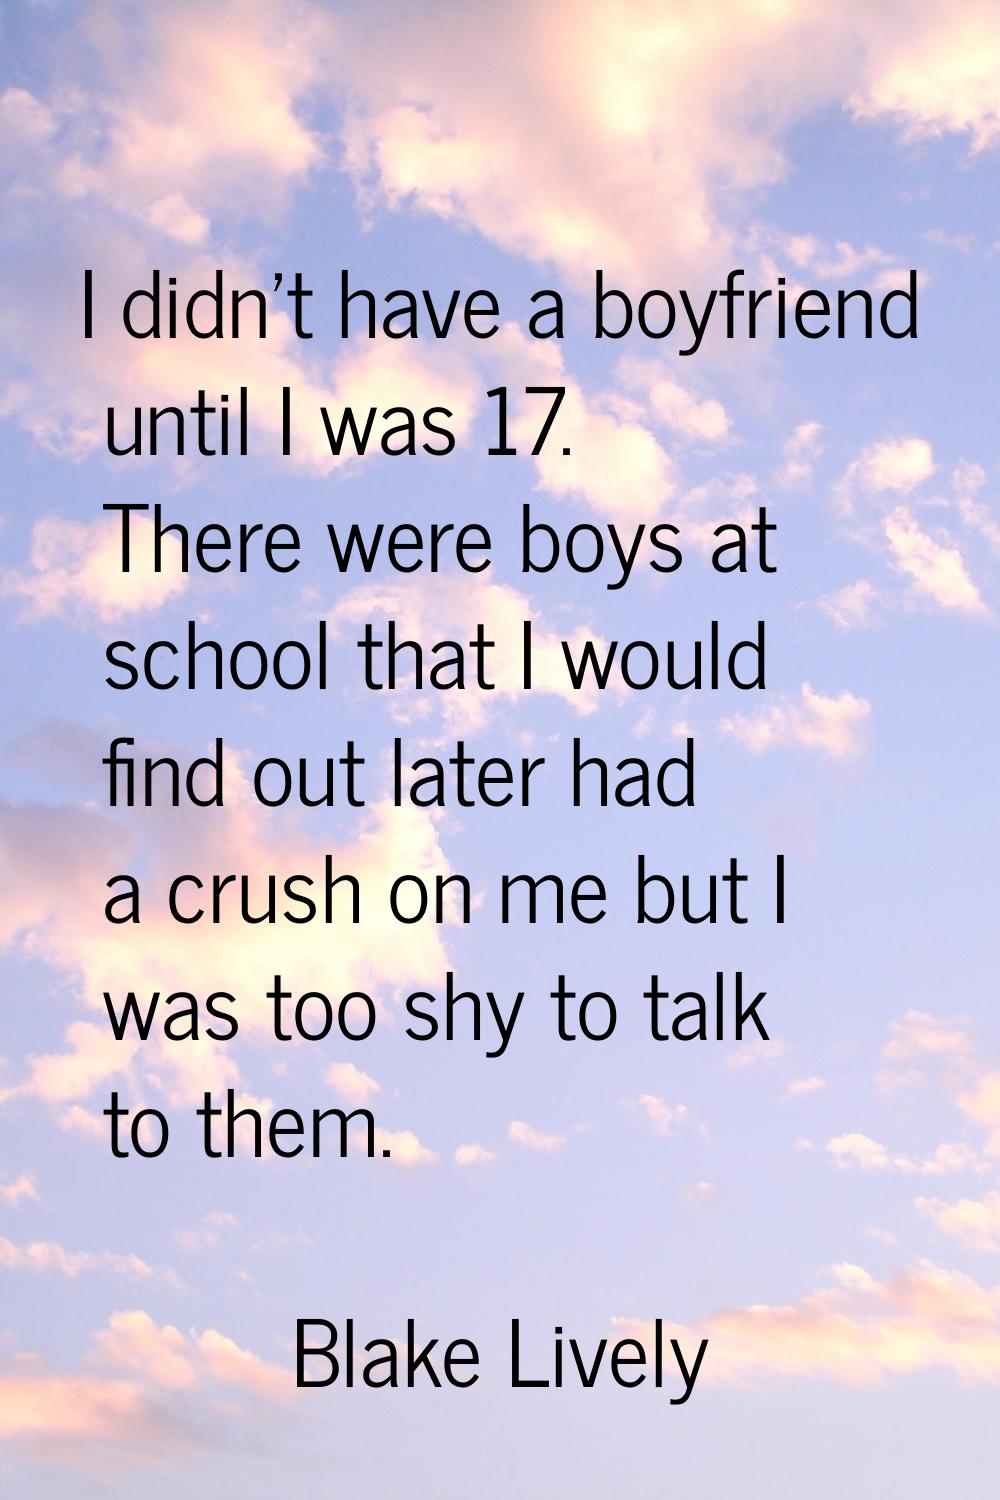 I didn't have a boyfriend until I was 17. There were boys at school that I would find out later had